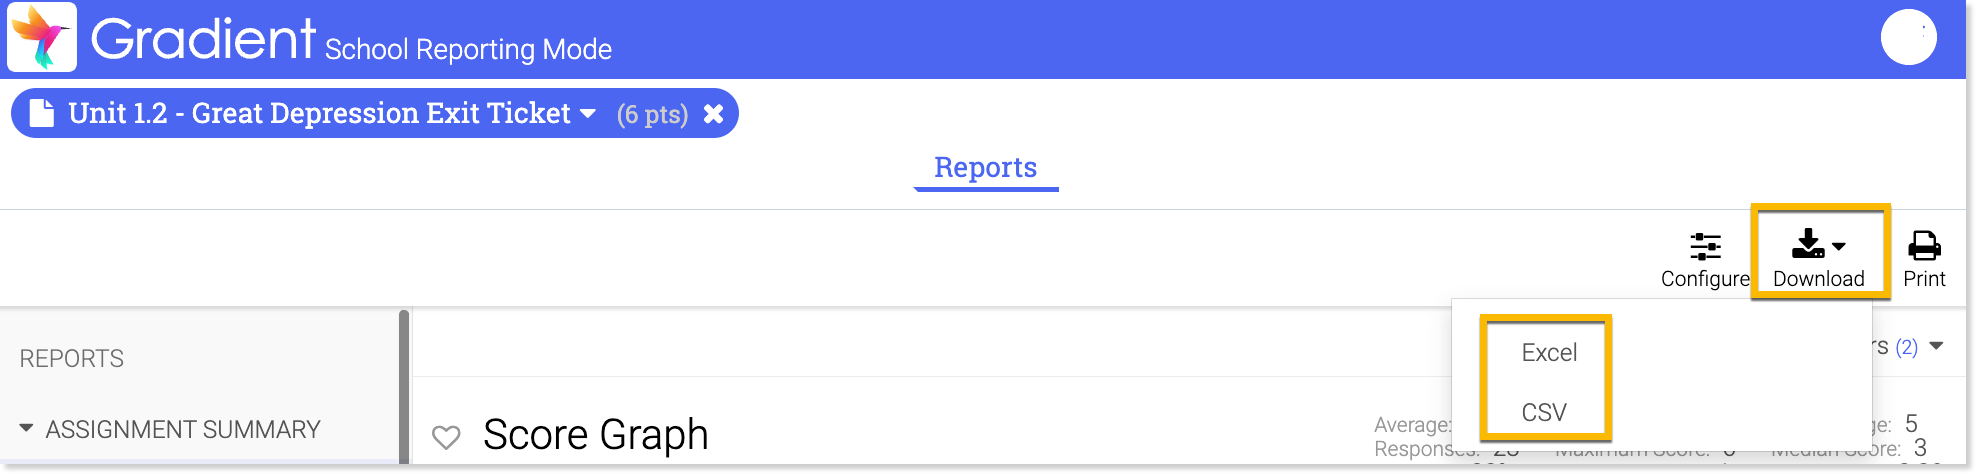 Reports - Download Icon.png